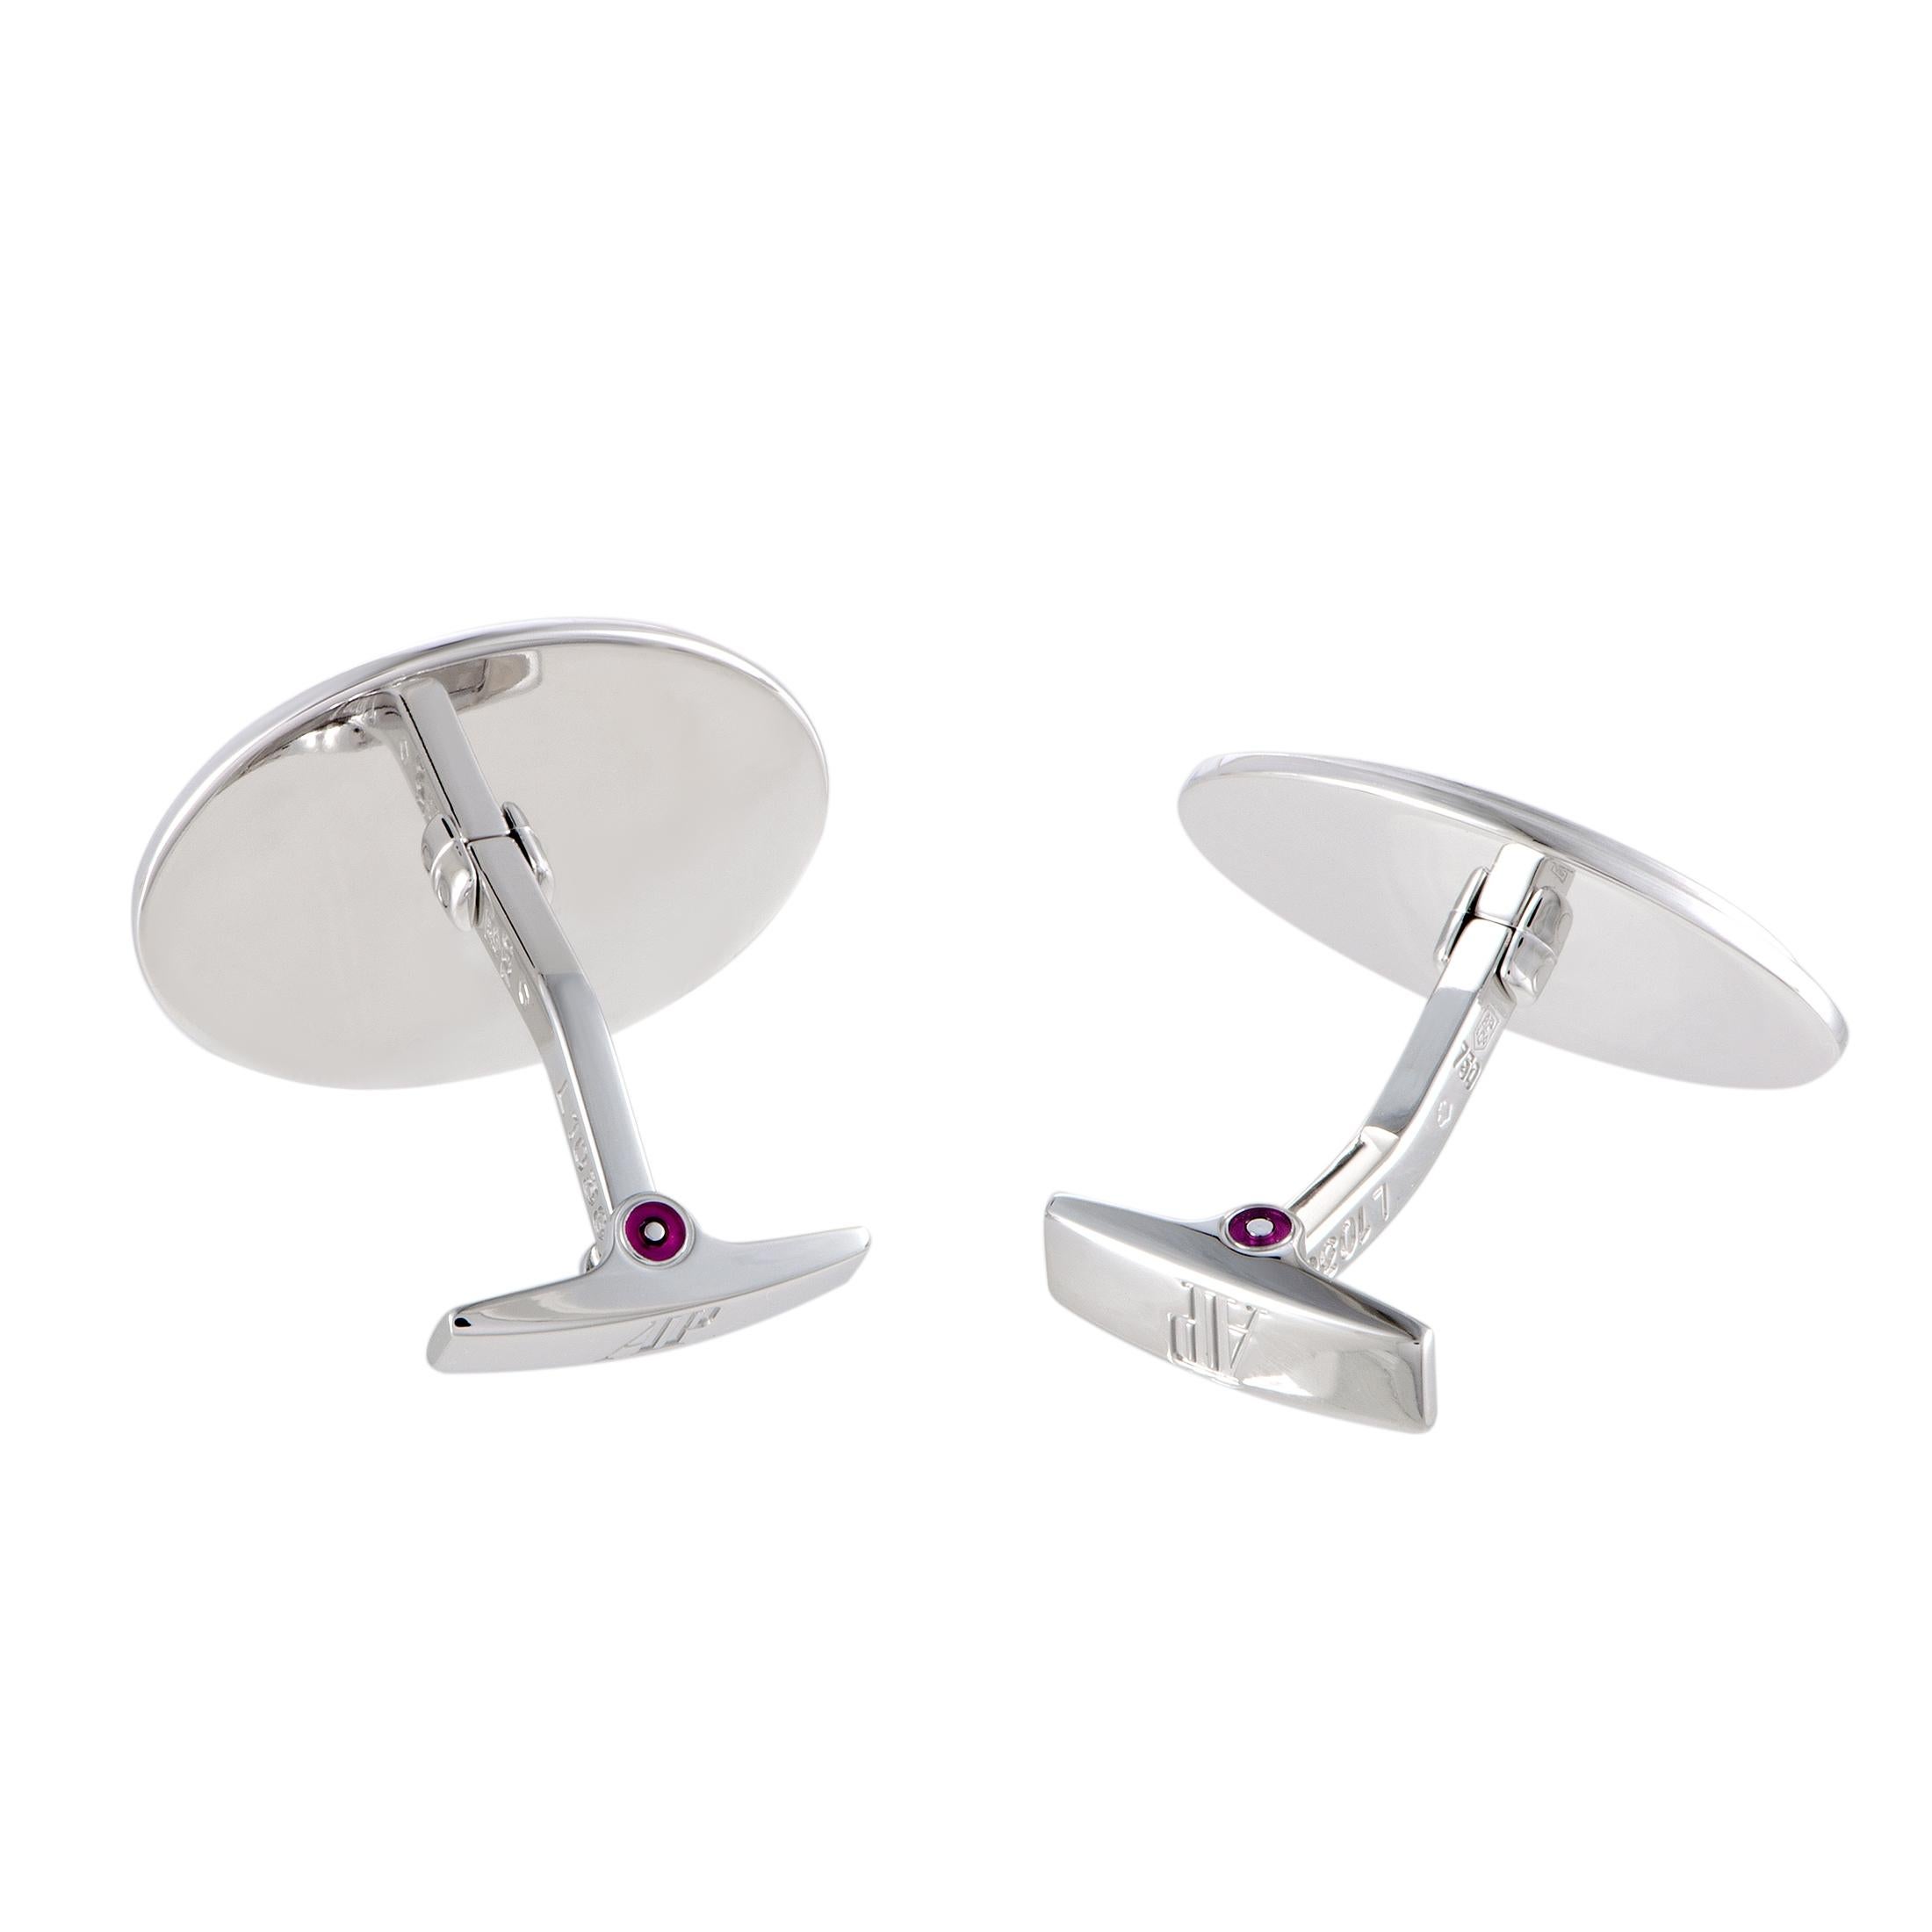 Creating an exceptionally attractive contrast with the eye-catching gemstones, the prestigiously gleaming precious metal lends its remarkably elegant appeal to these exquisite cufflinks that feature a splendidly refined design. The cufflinks are